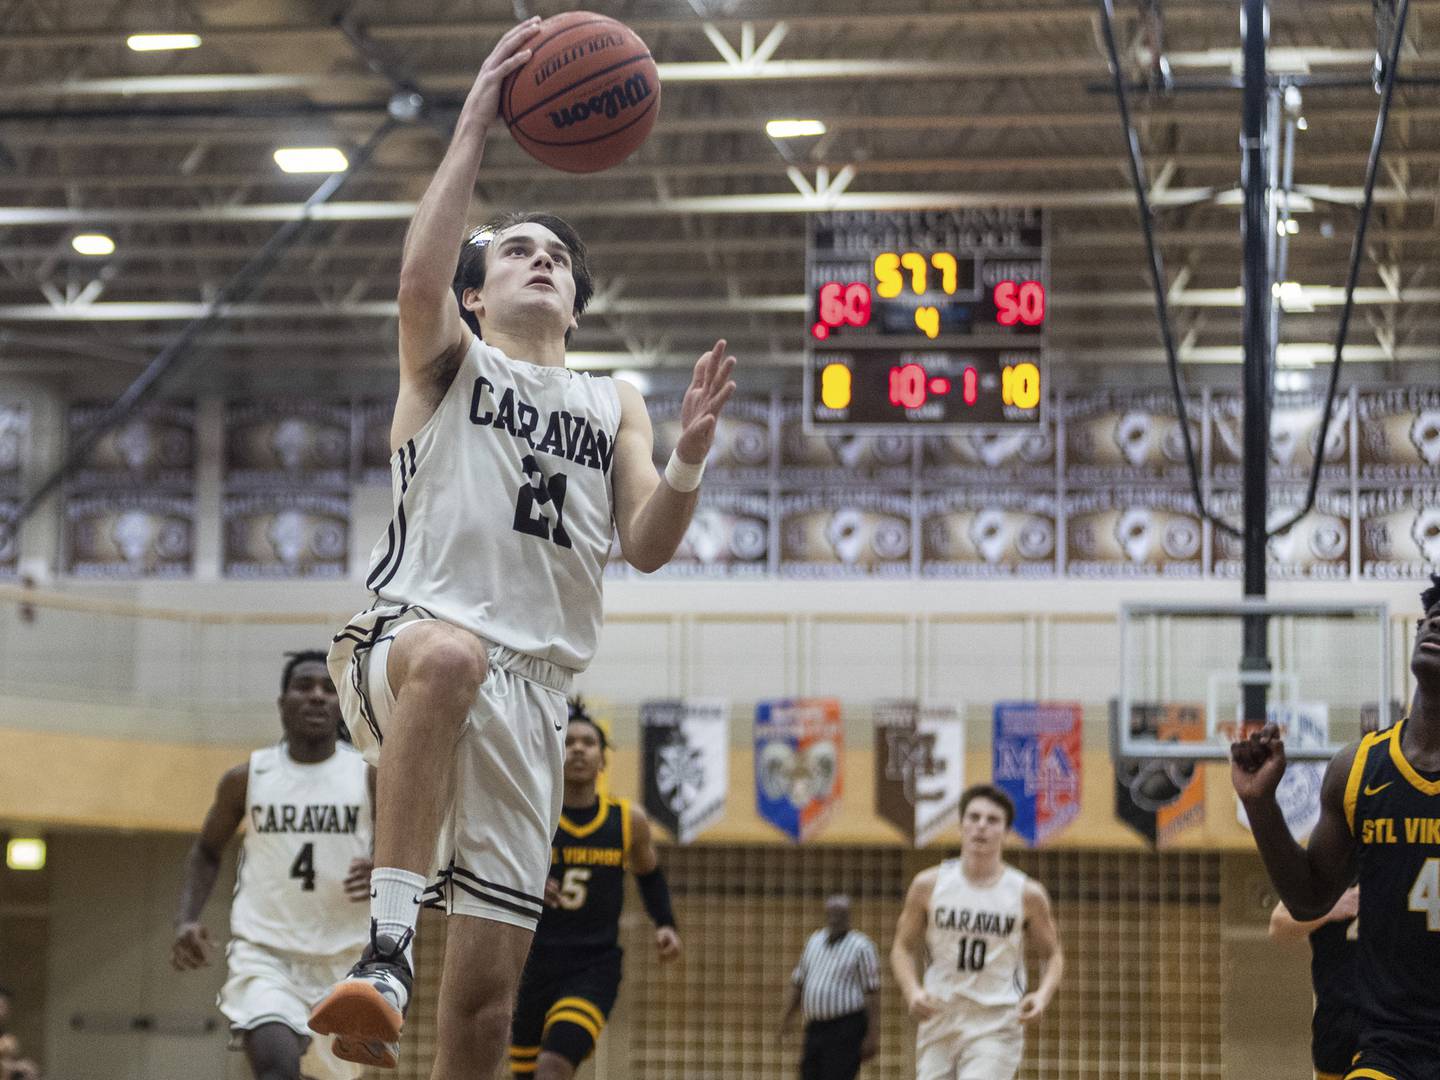 Mount Carmel's Anthony Ciaravino (21) finishes off a layup against St. Laurence during a Catholic League crossover in Chicago on Tuesday, Dec. 6, 2022.